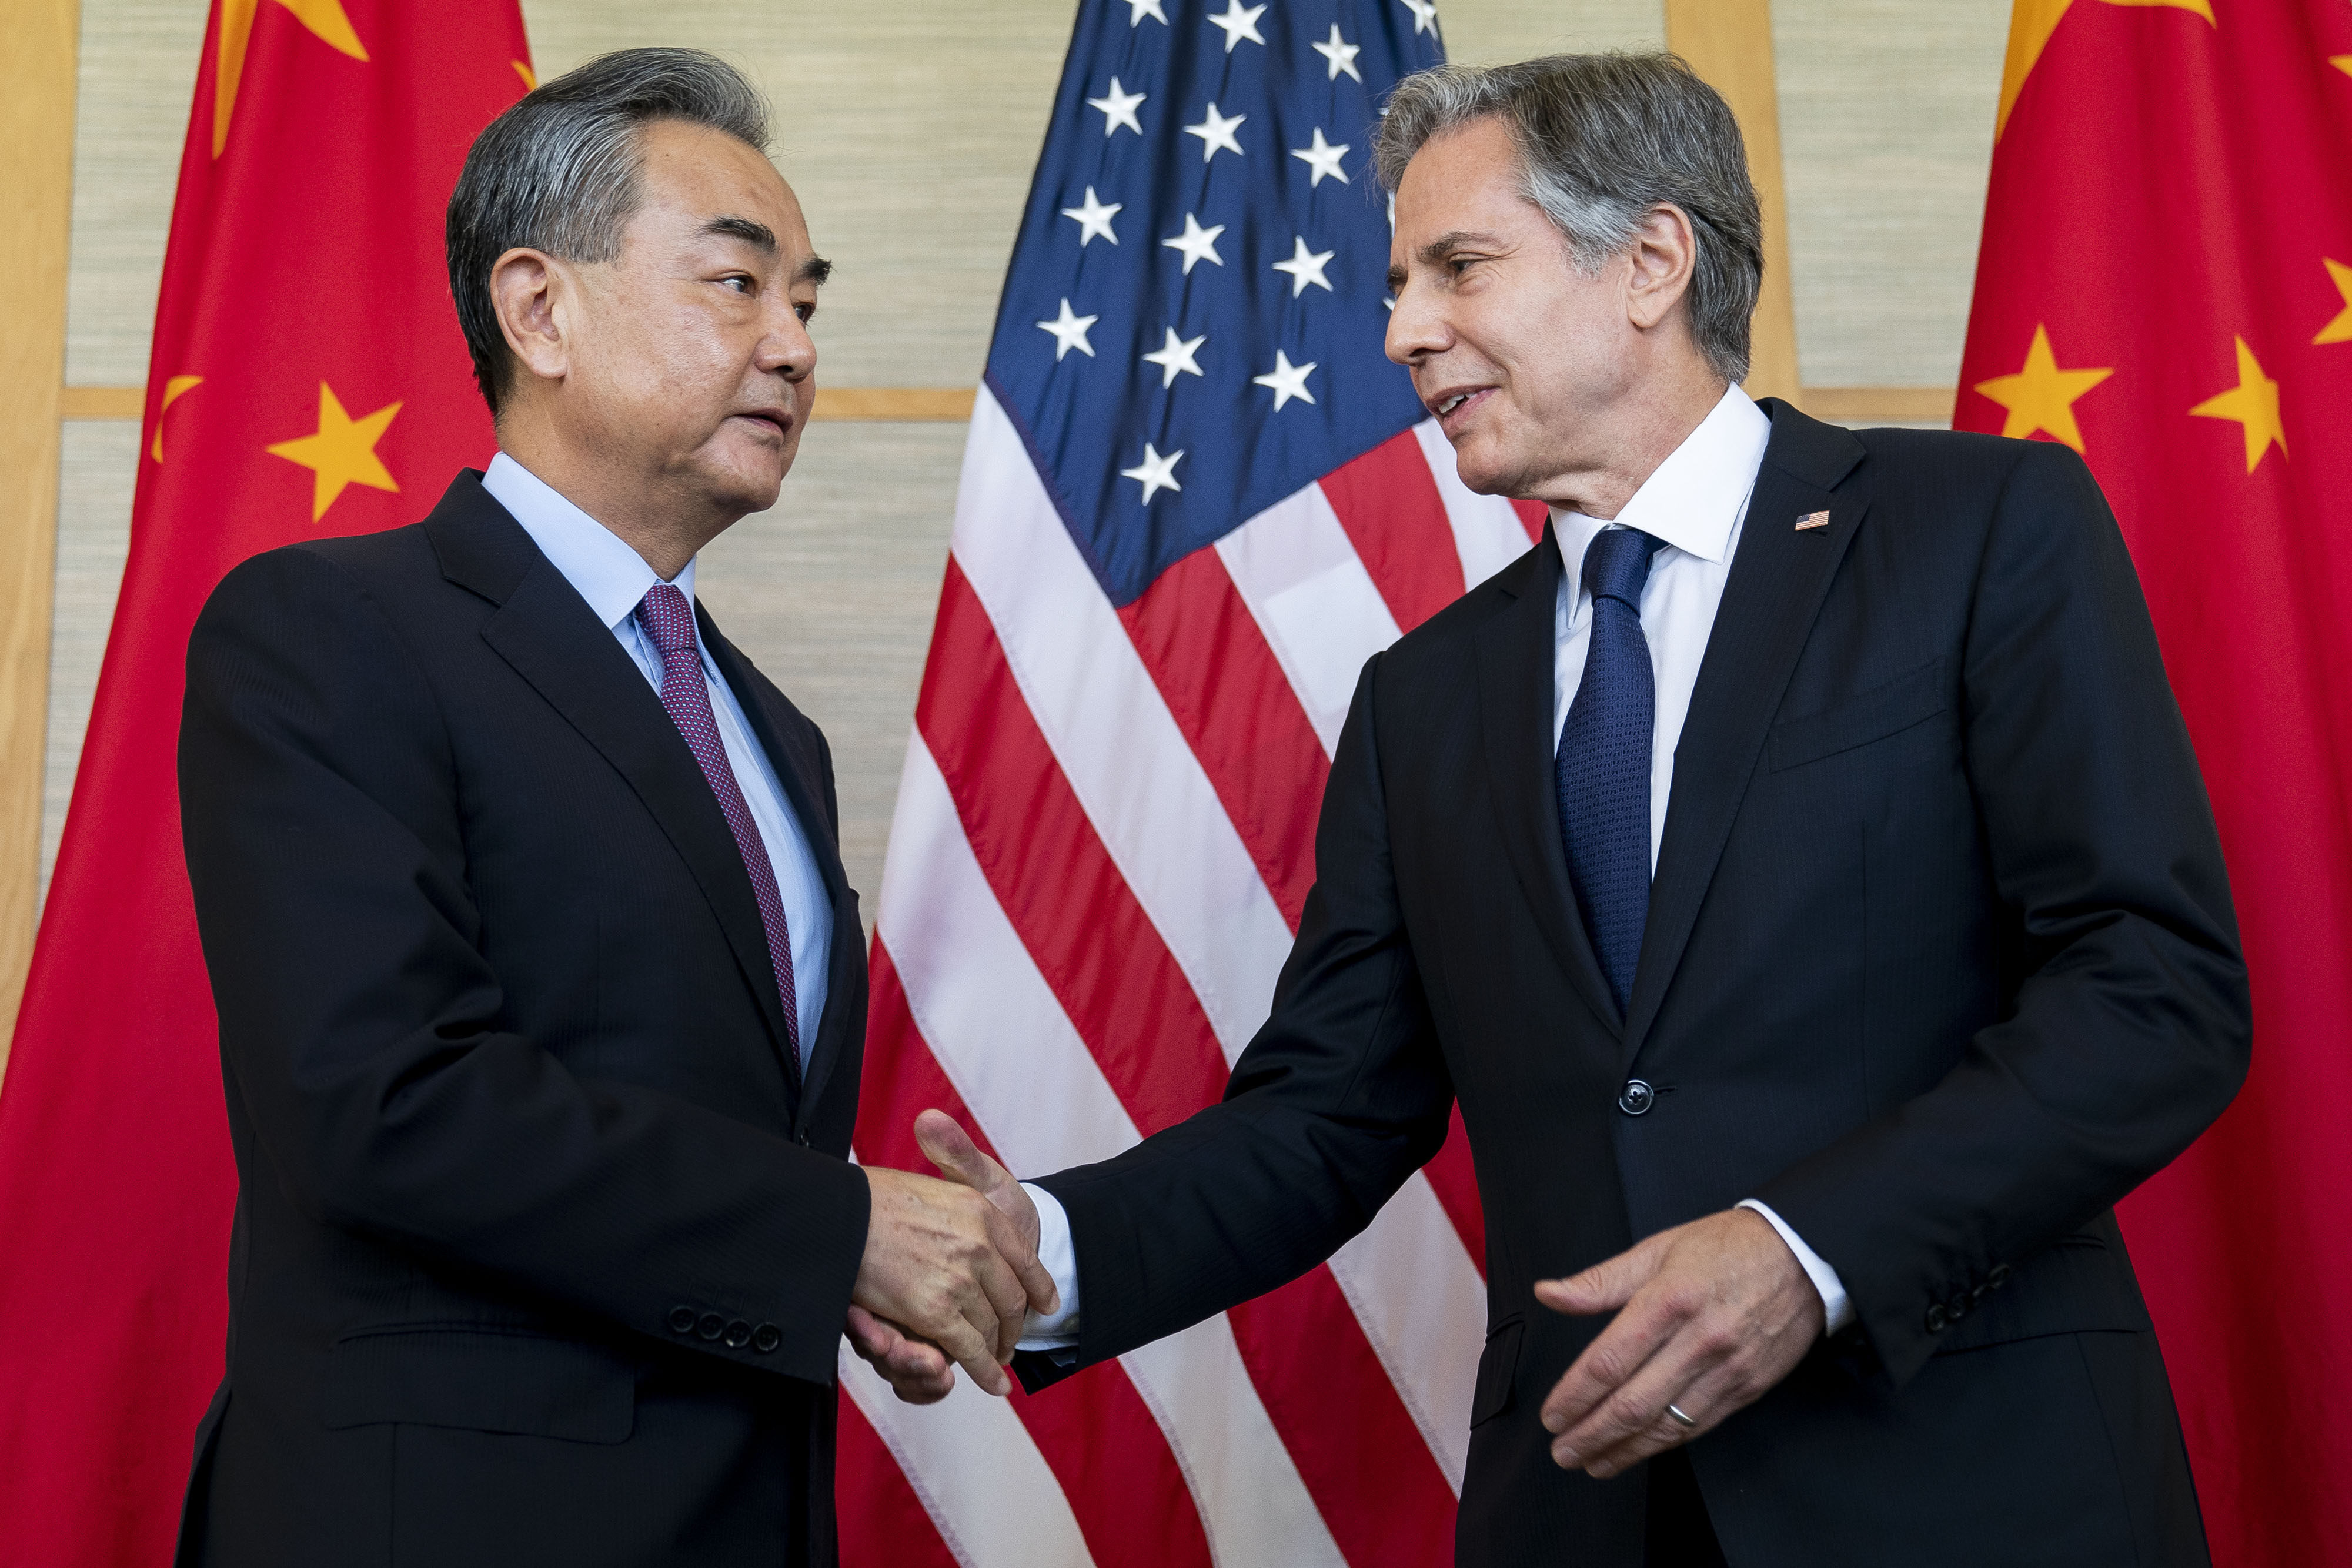 US Secretary of State Antony Blinken shakes hands with China’s Foreign Minister Wang Yi during a meeting in Bali, Indonesia in July 2022. Photo: AP